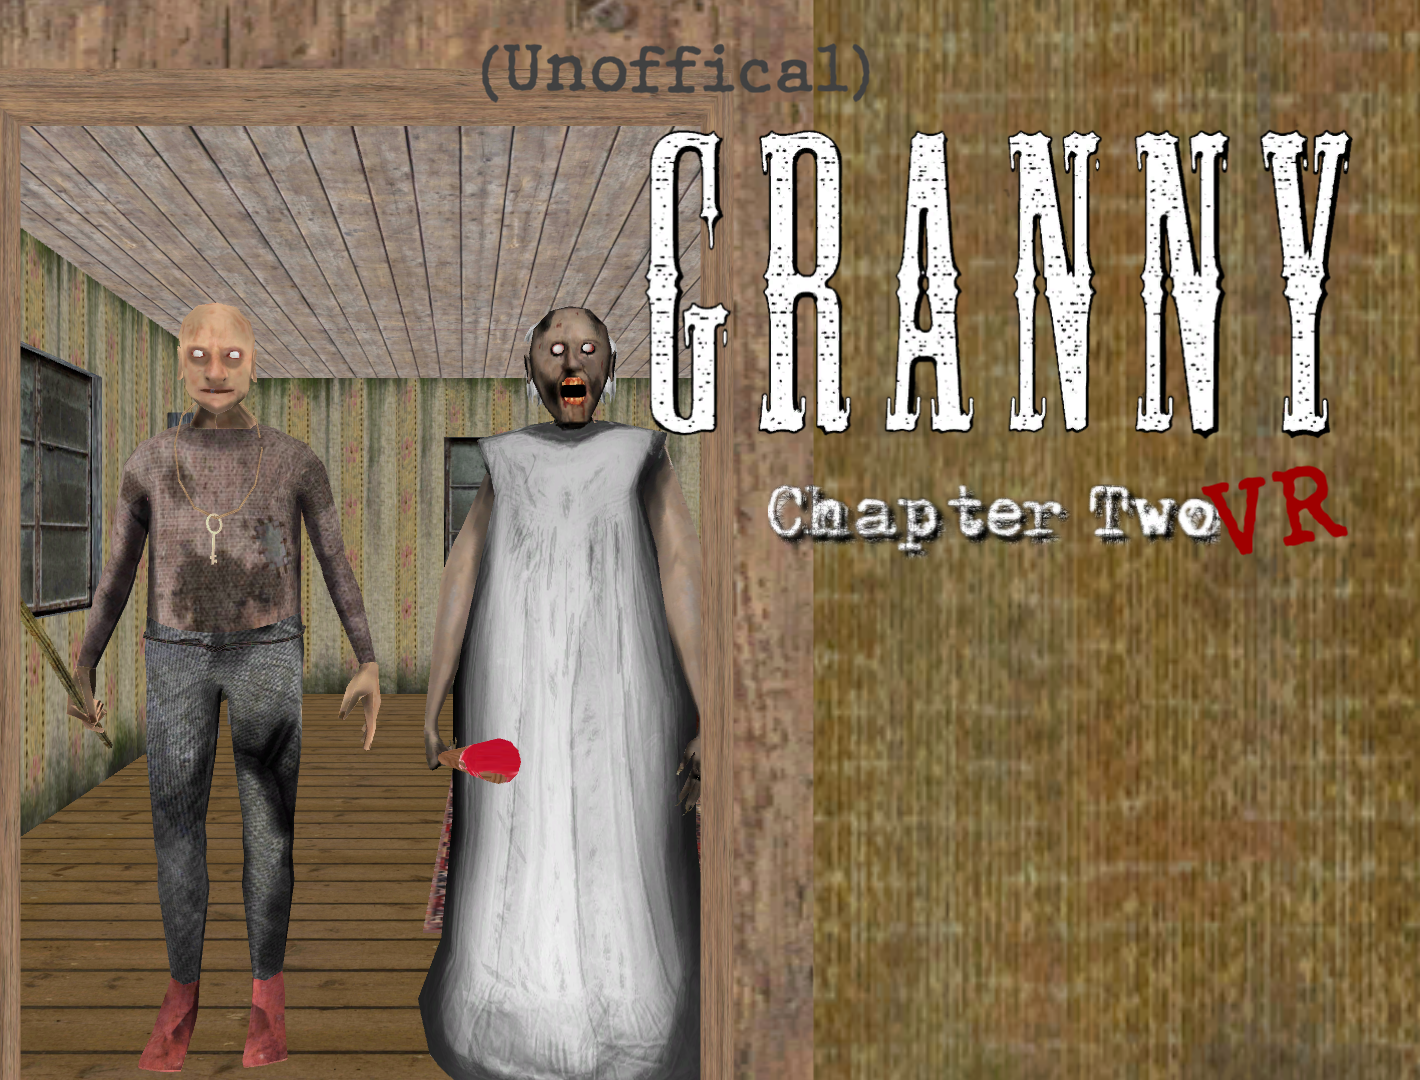 Granny 2 Vr Unofficial Pico Support On Sidequest Oculus Quest